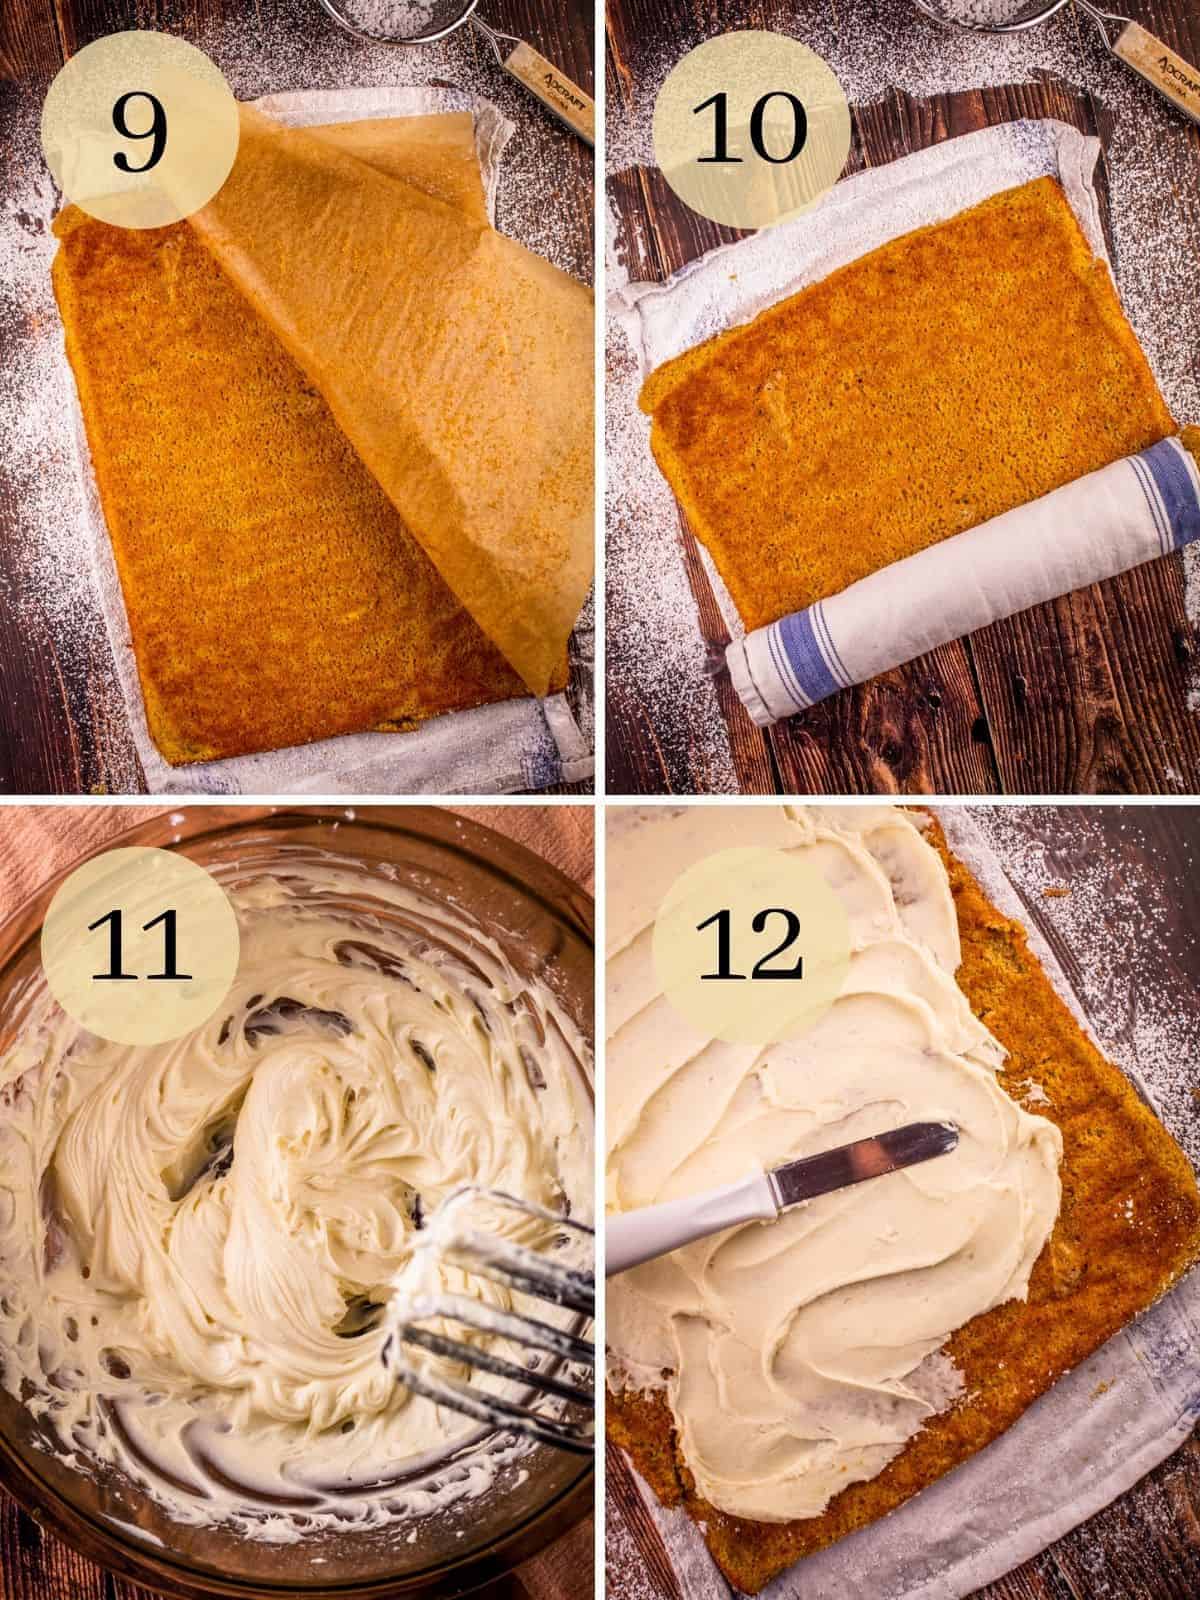 cake with parchment, cake rolled up in a towel, mixing filling and spreading on cake